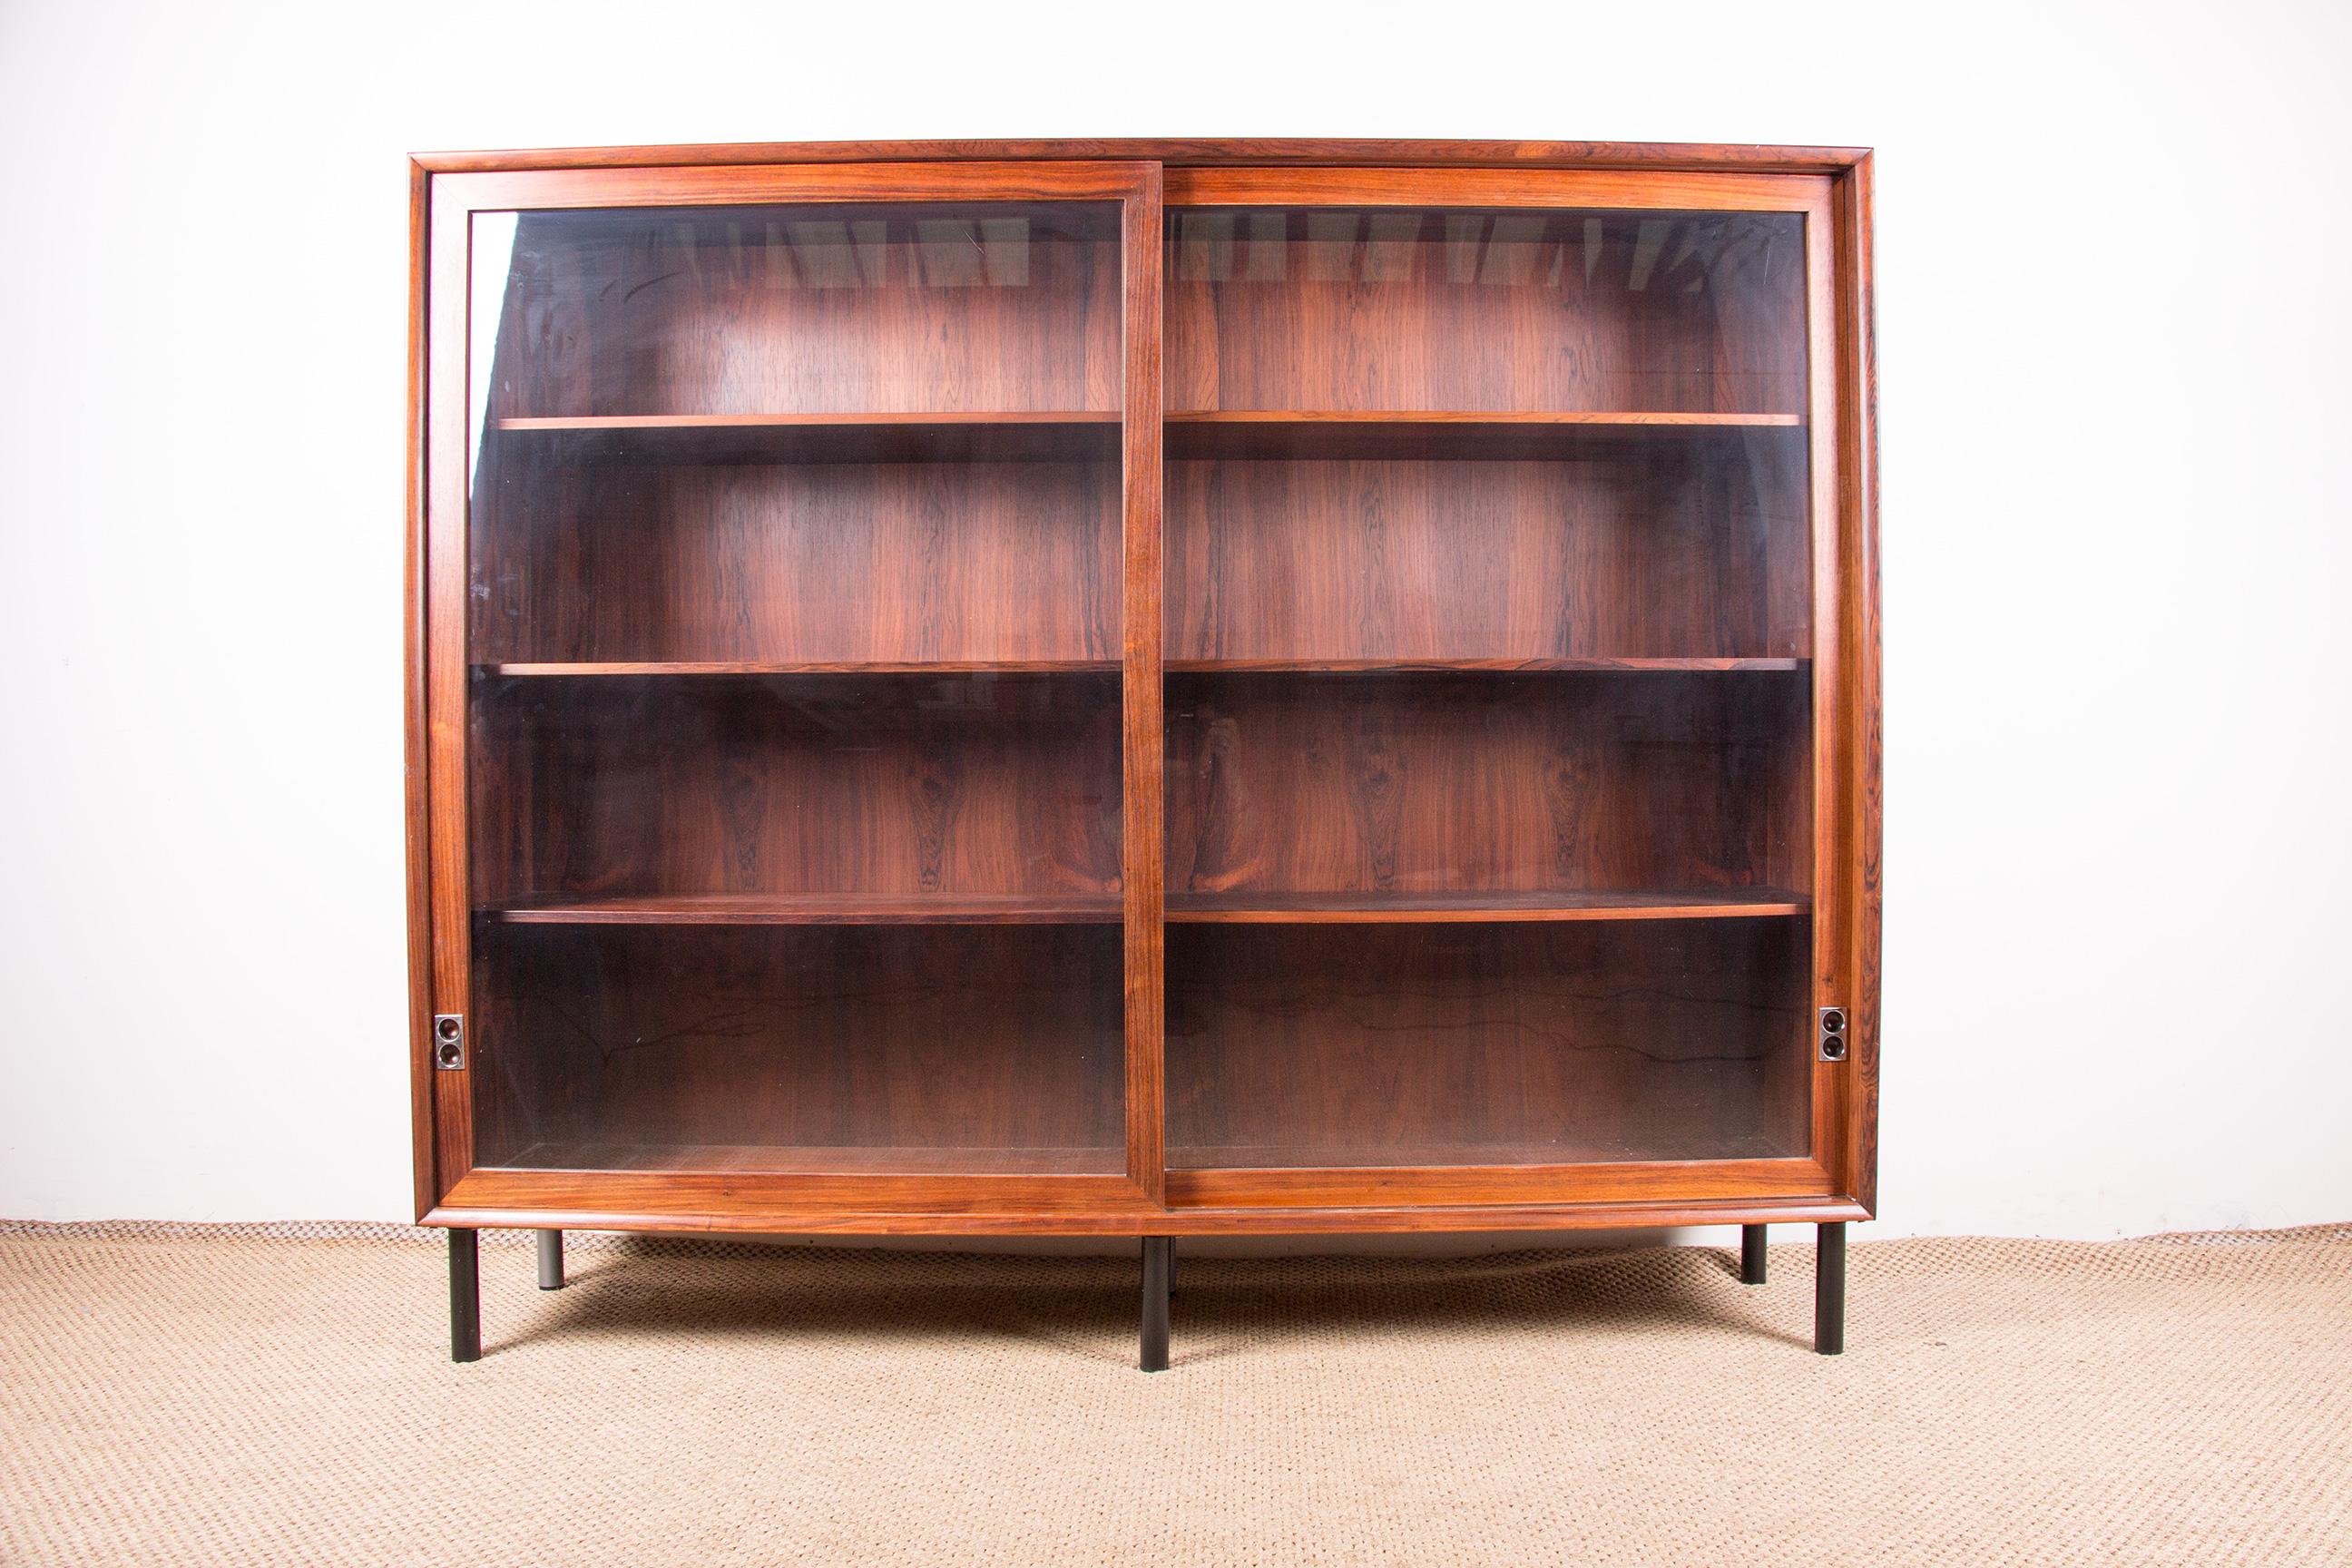 Superb Scandinavian bookcase with 2 large sliding doors that open onto two niches each with 3 shelves. Very high-end manufacturing, sober and elegant furniture. Remarkable build quality.